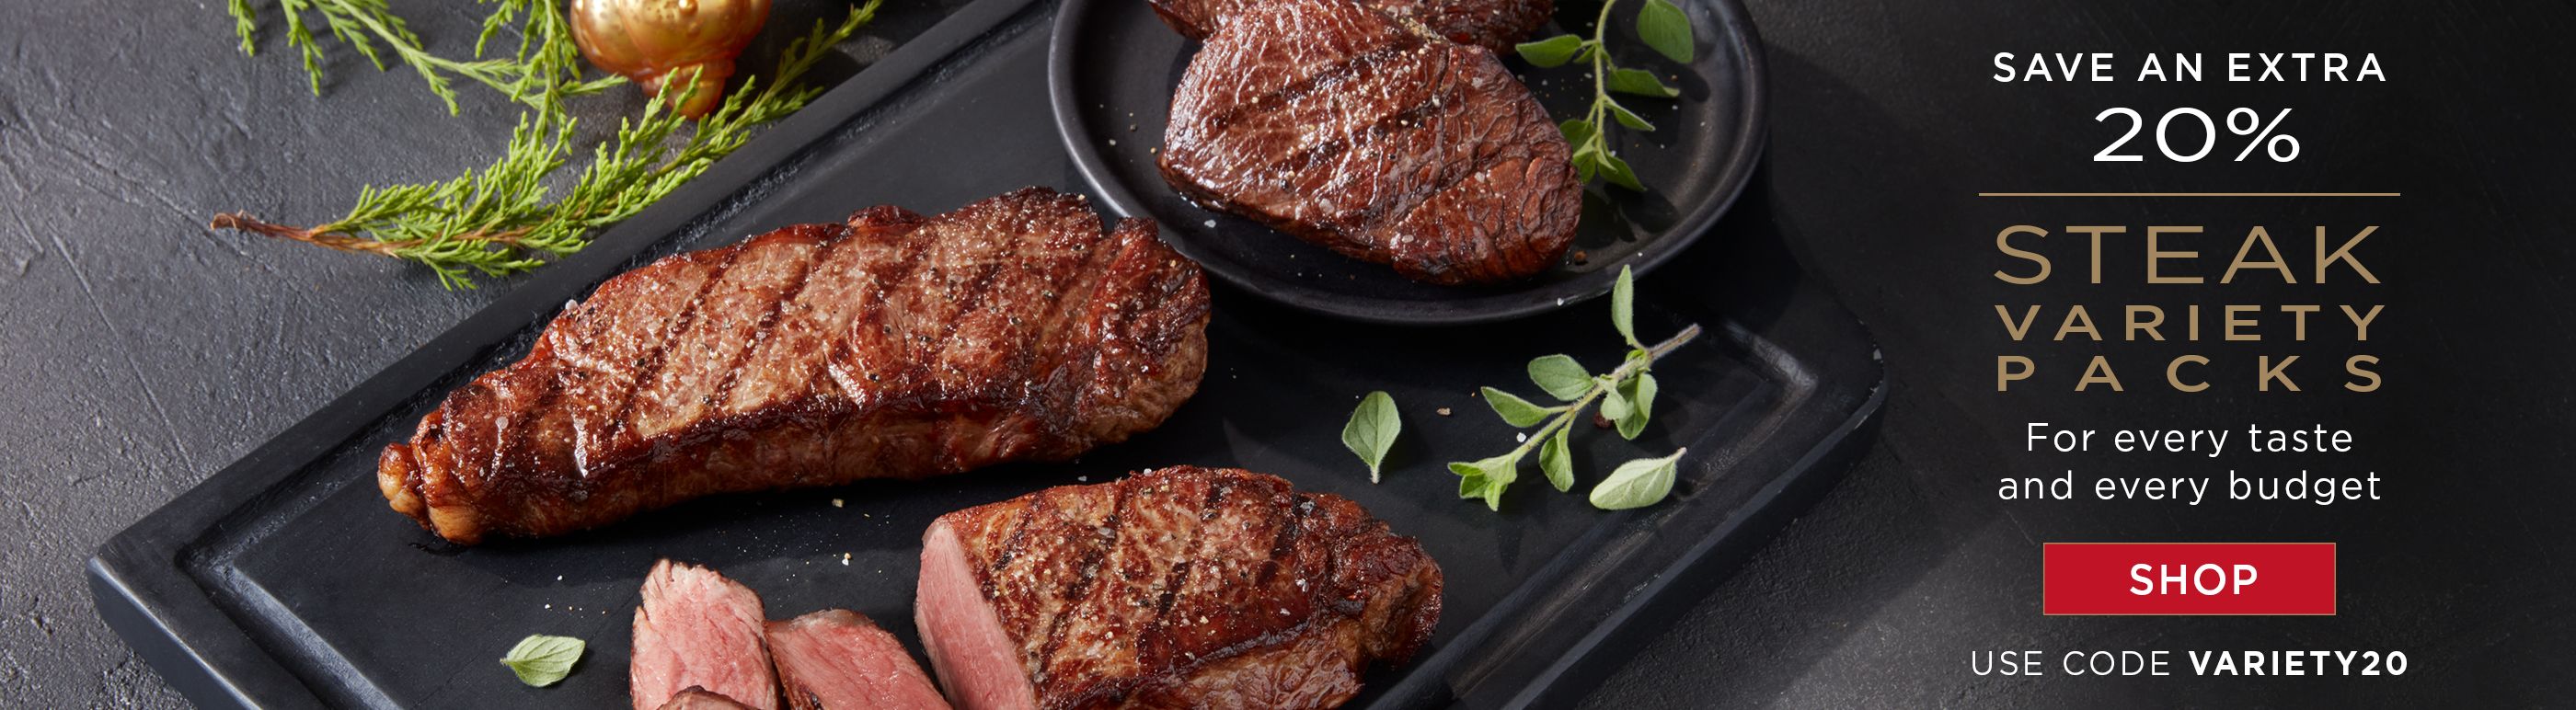 Save an extra 20% on steak variety packs with code variety20.